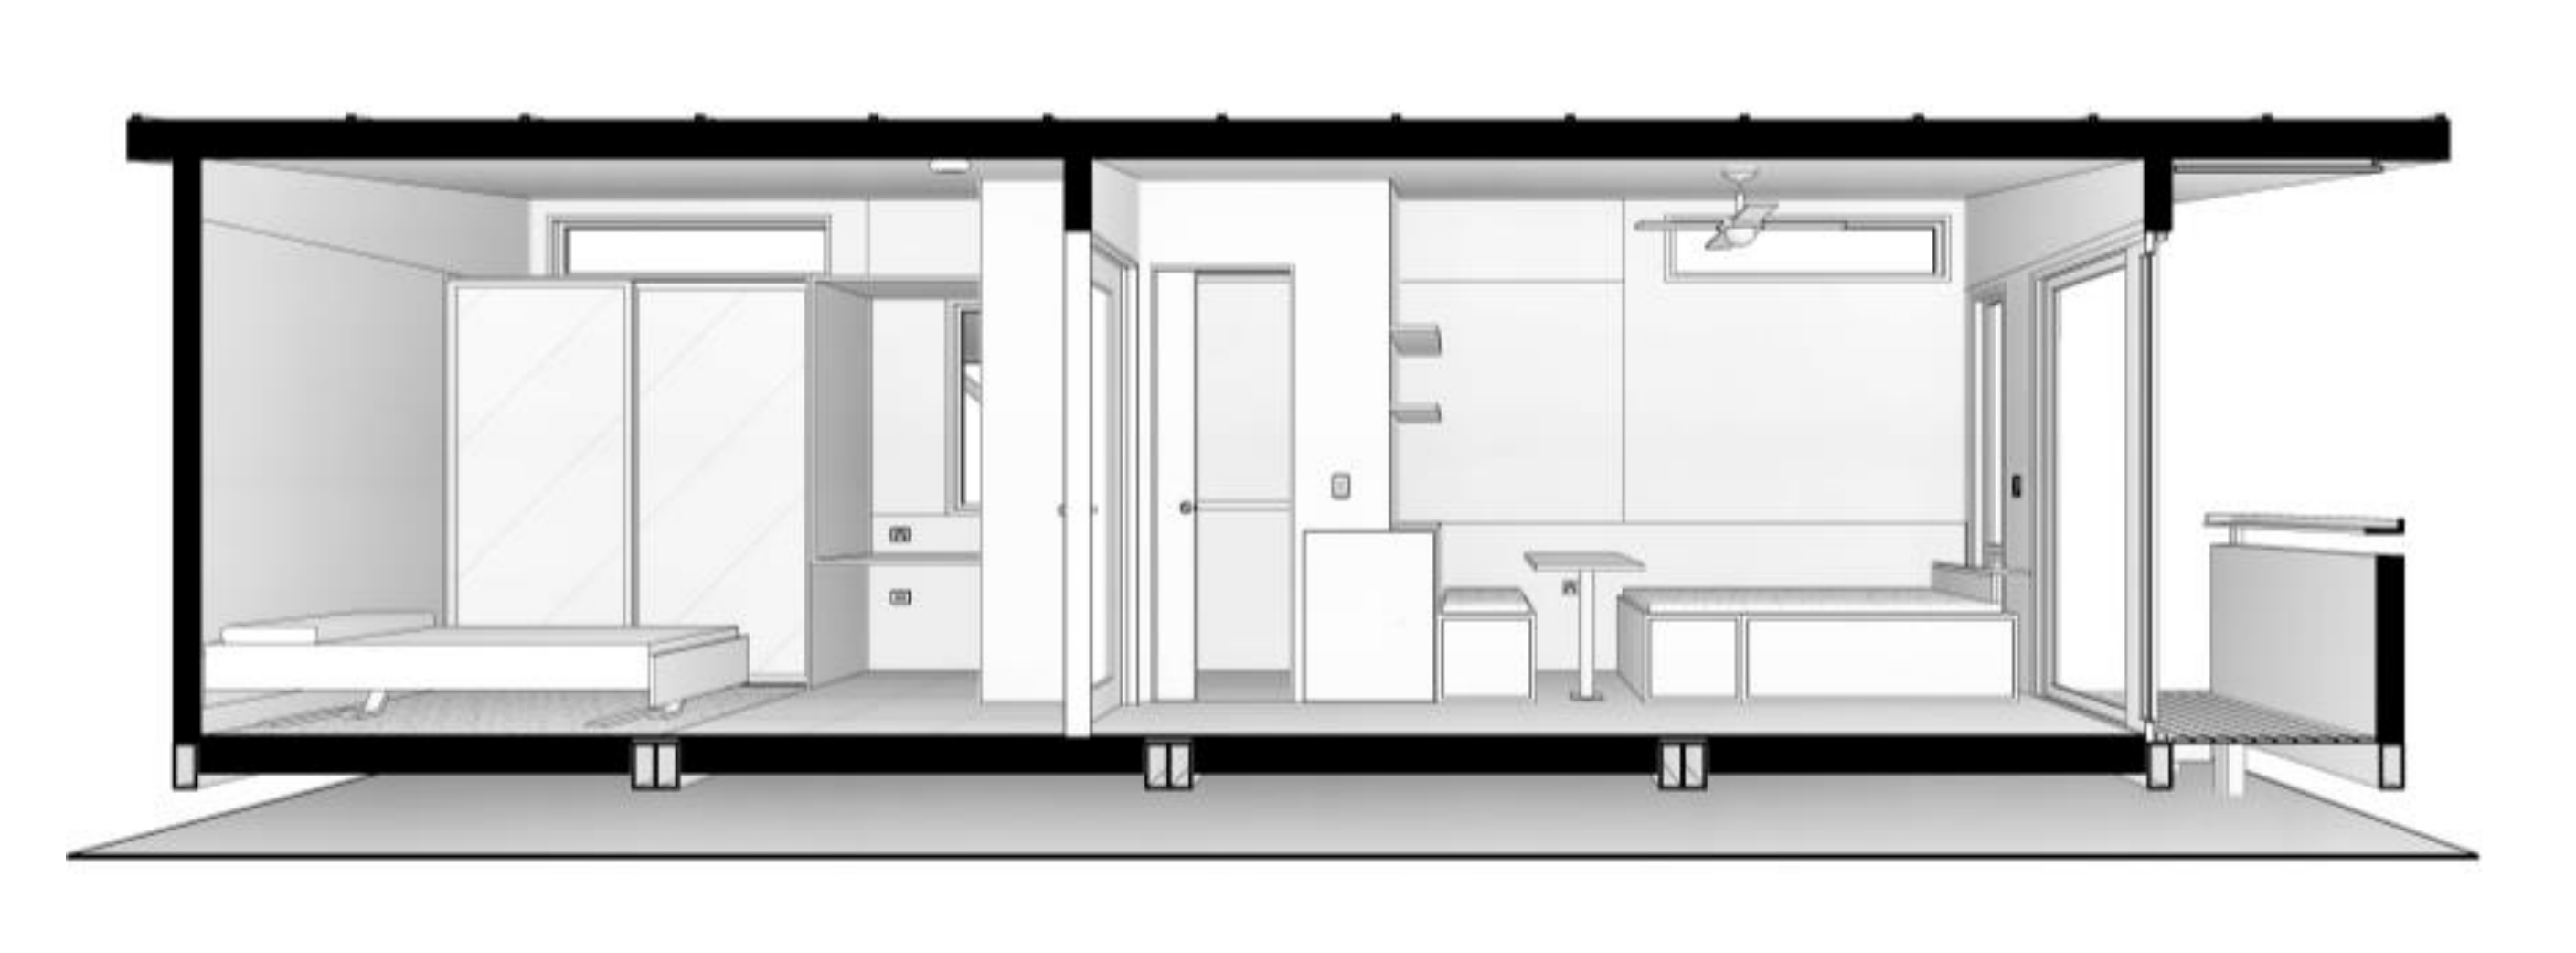 Prefab House mobile house  modular building Sojourn House outdoor mobile building  